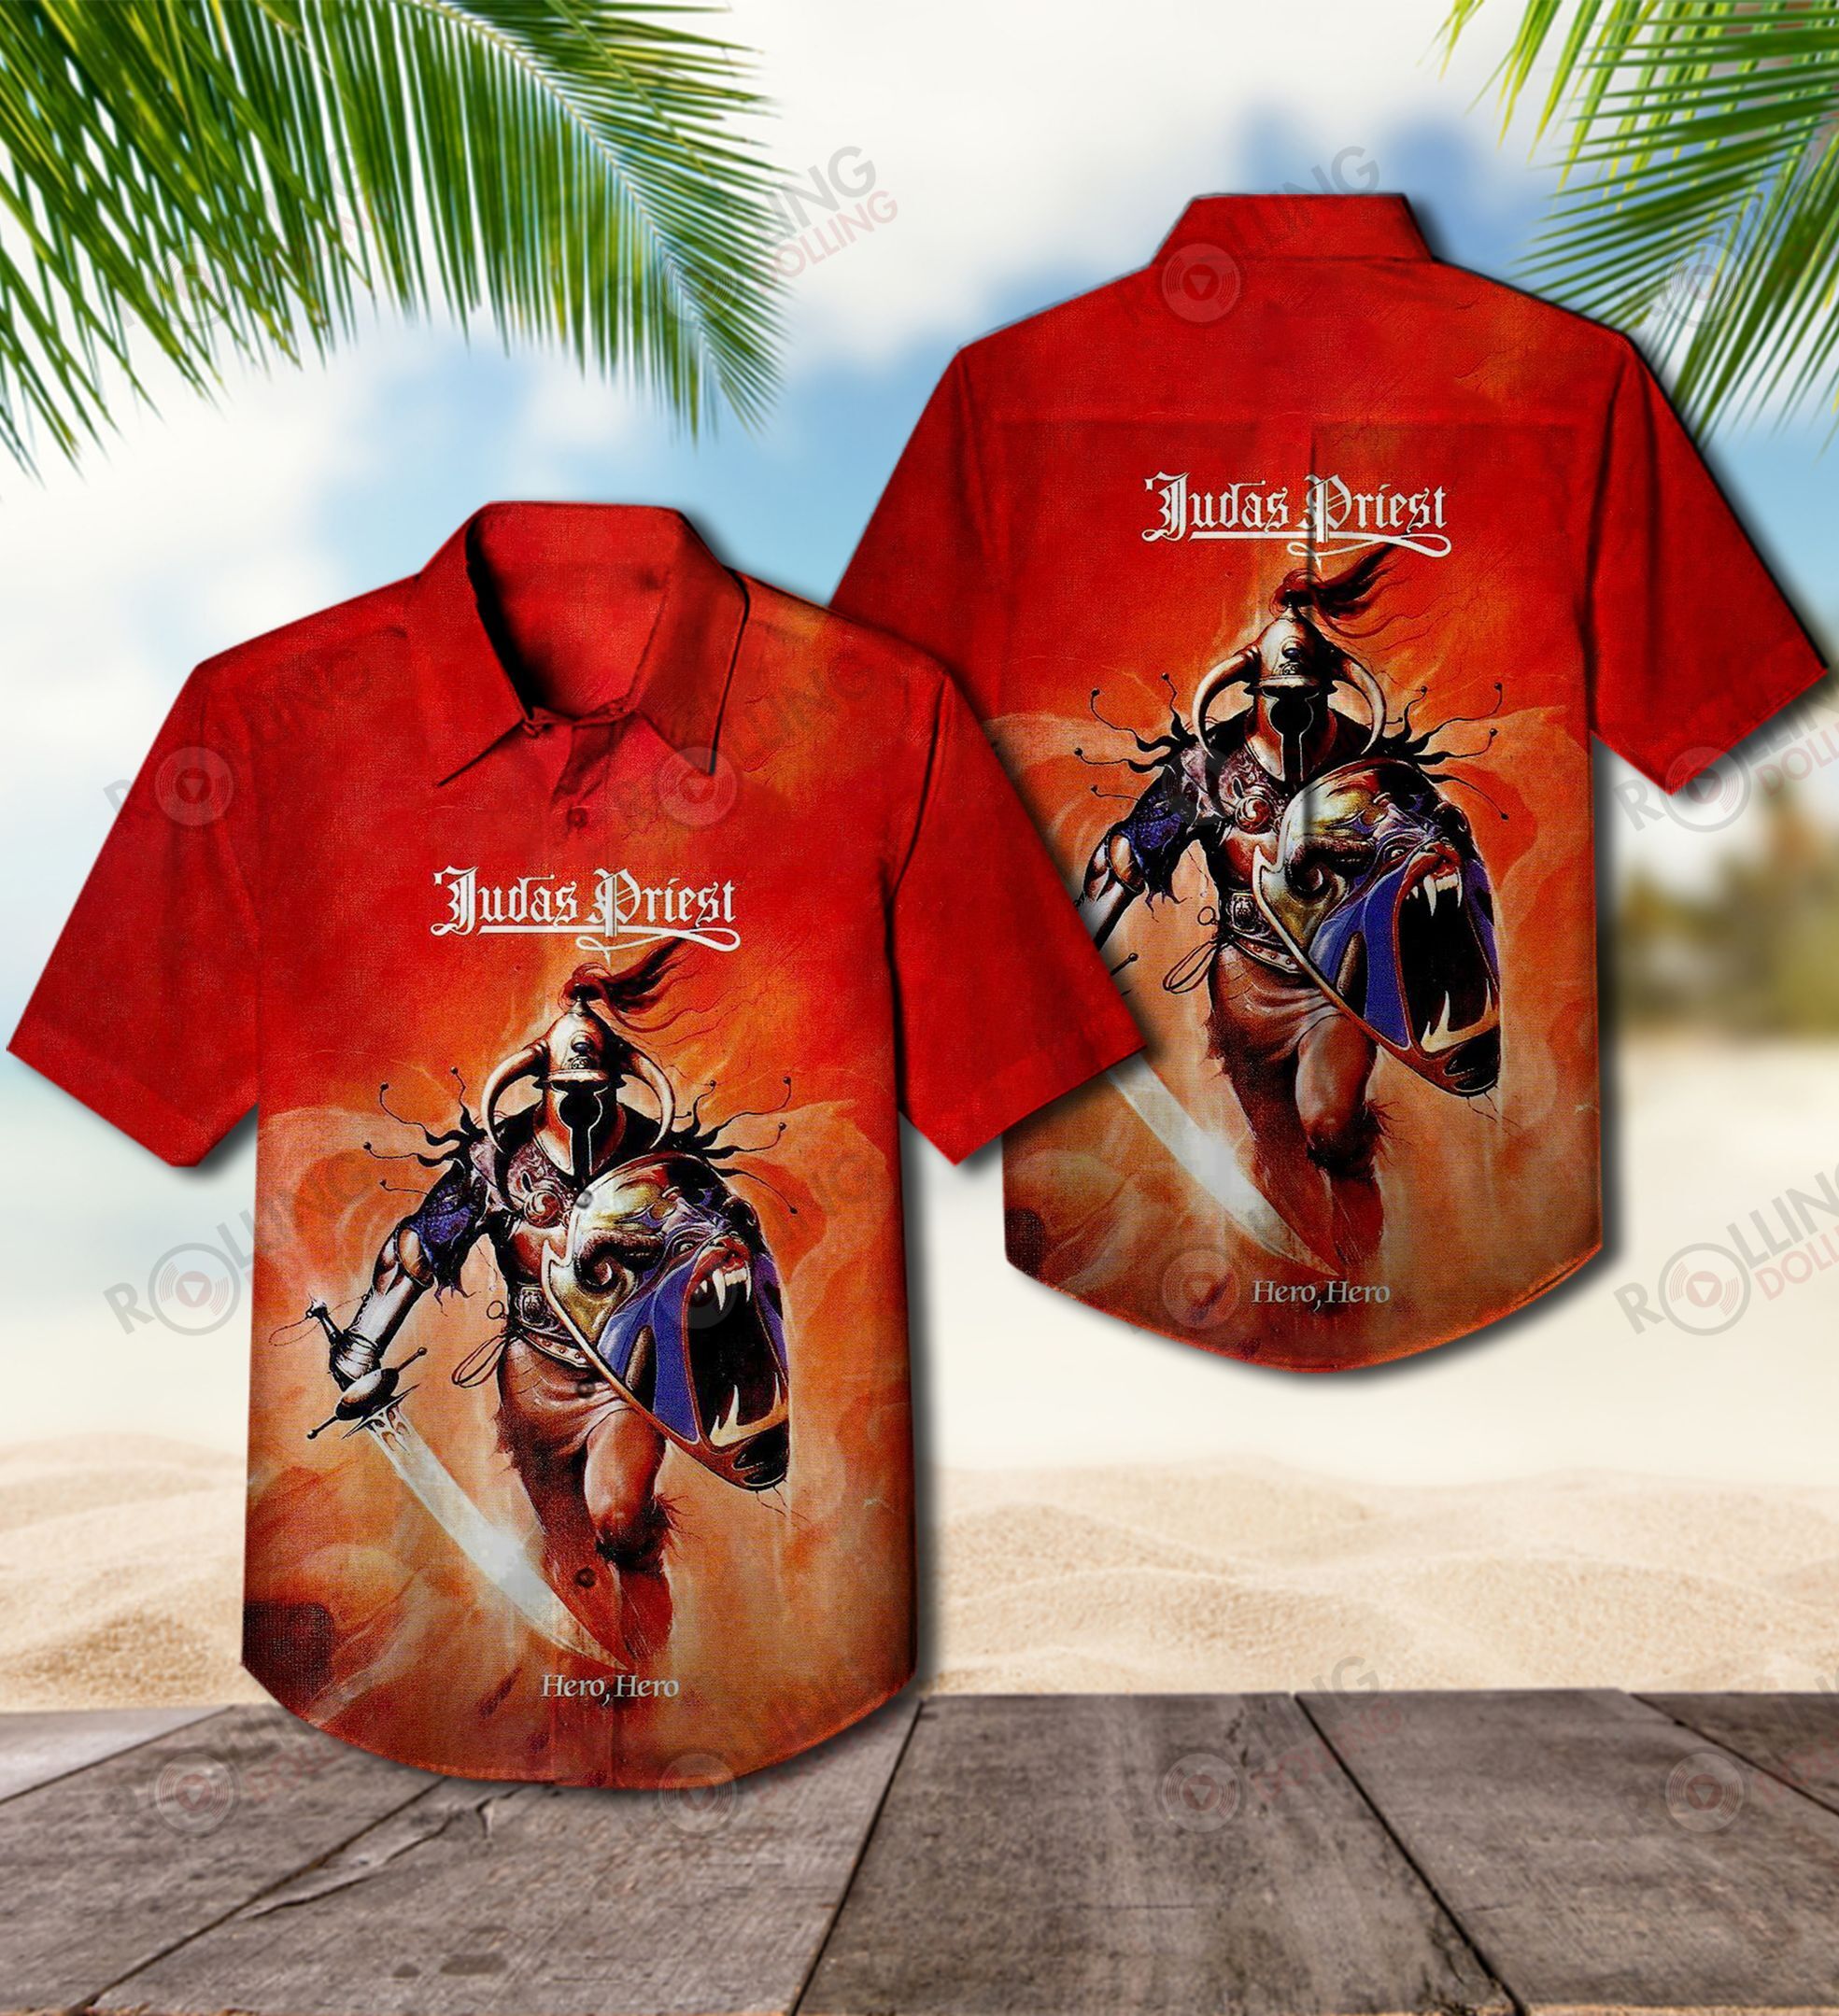 For summer, consider wearing This Amazing Hawaiian Shirt shirt in our store 83